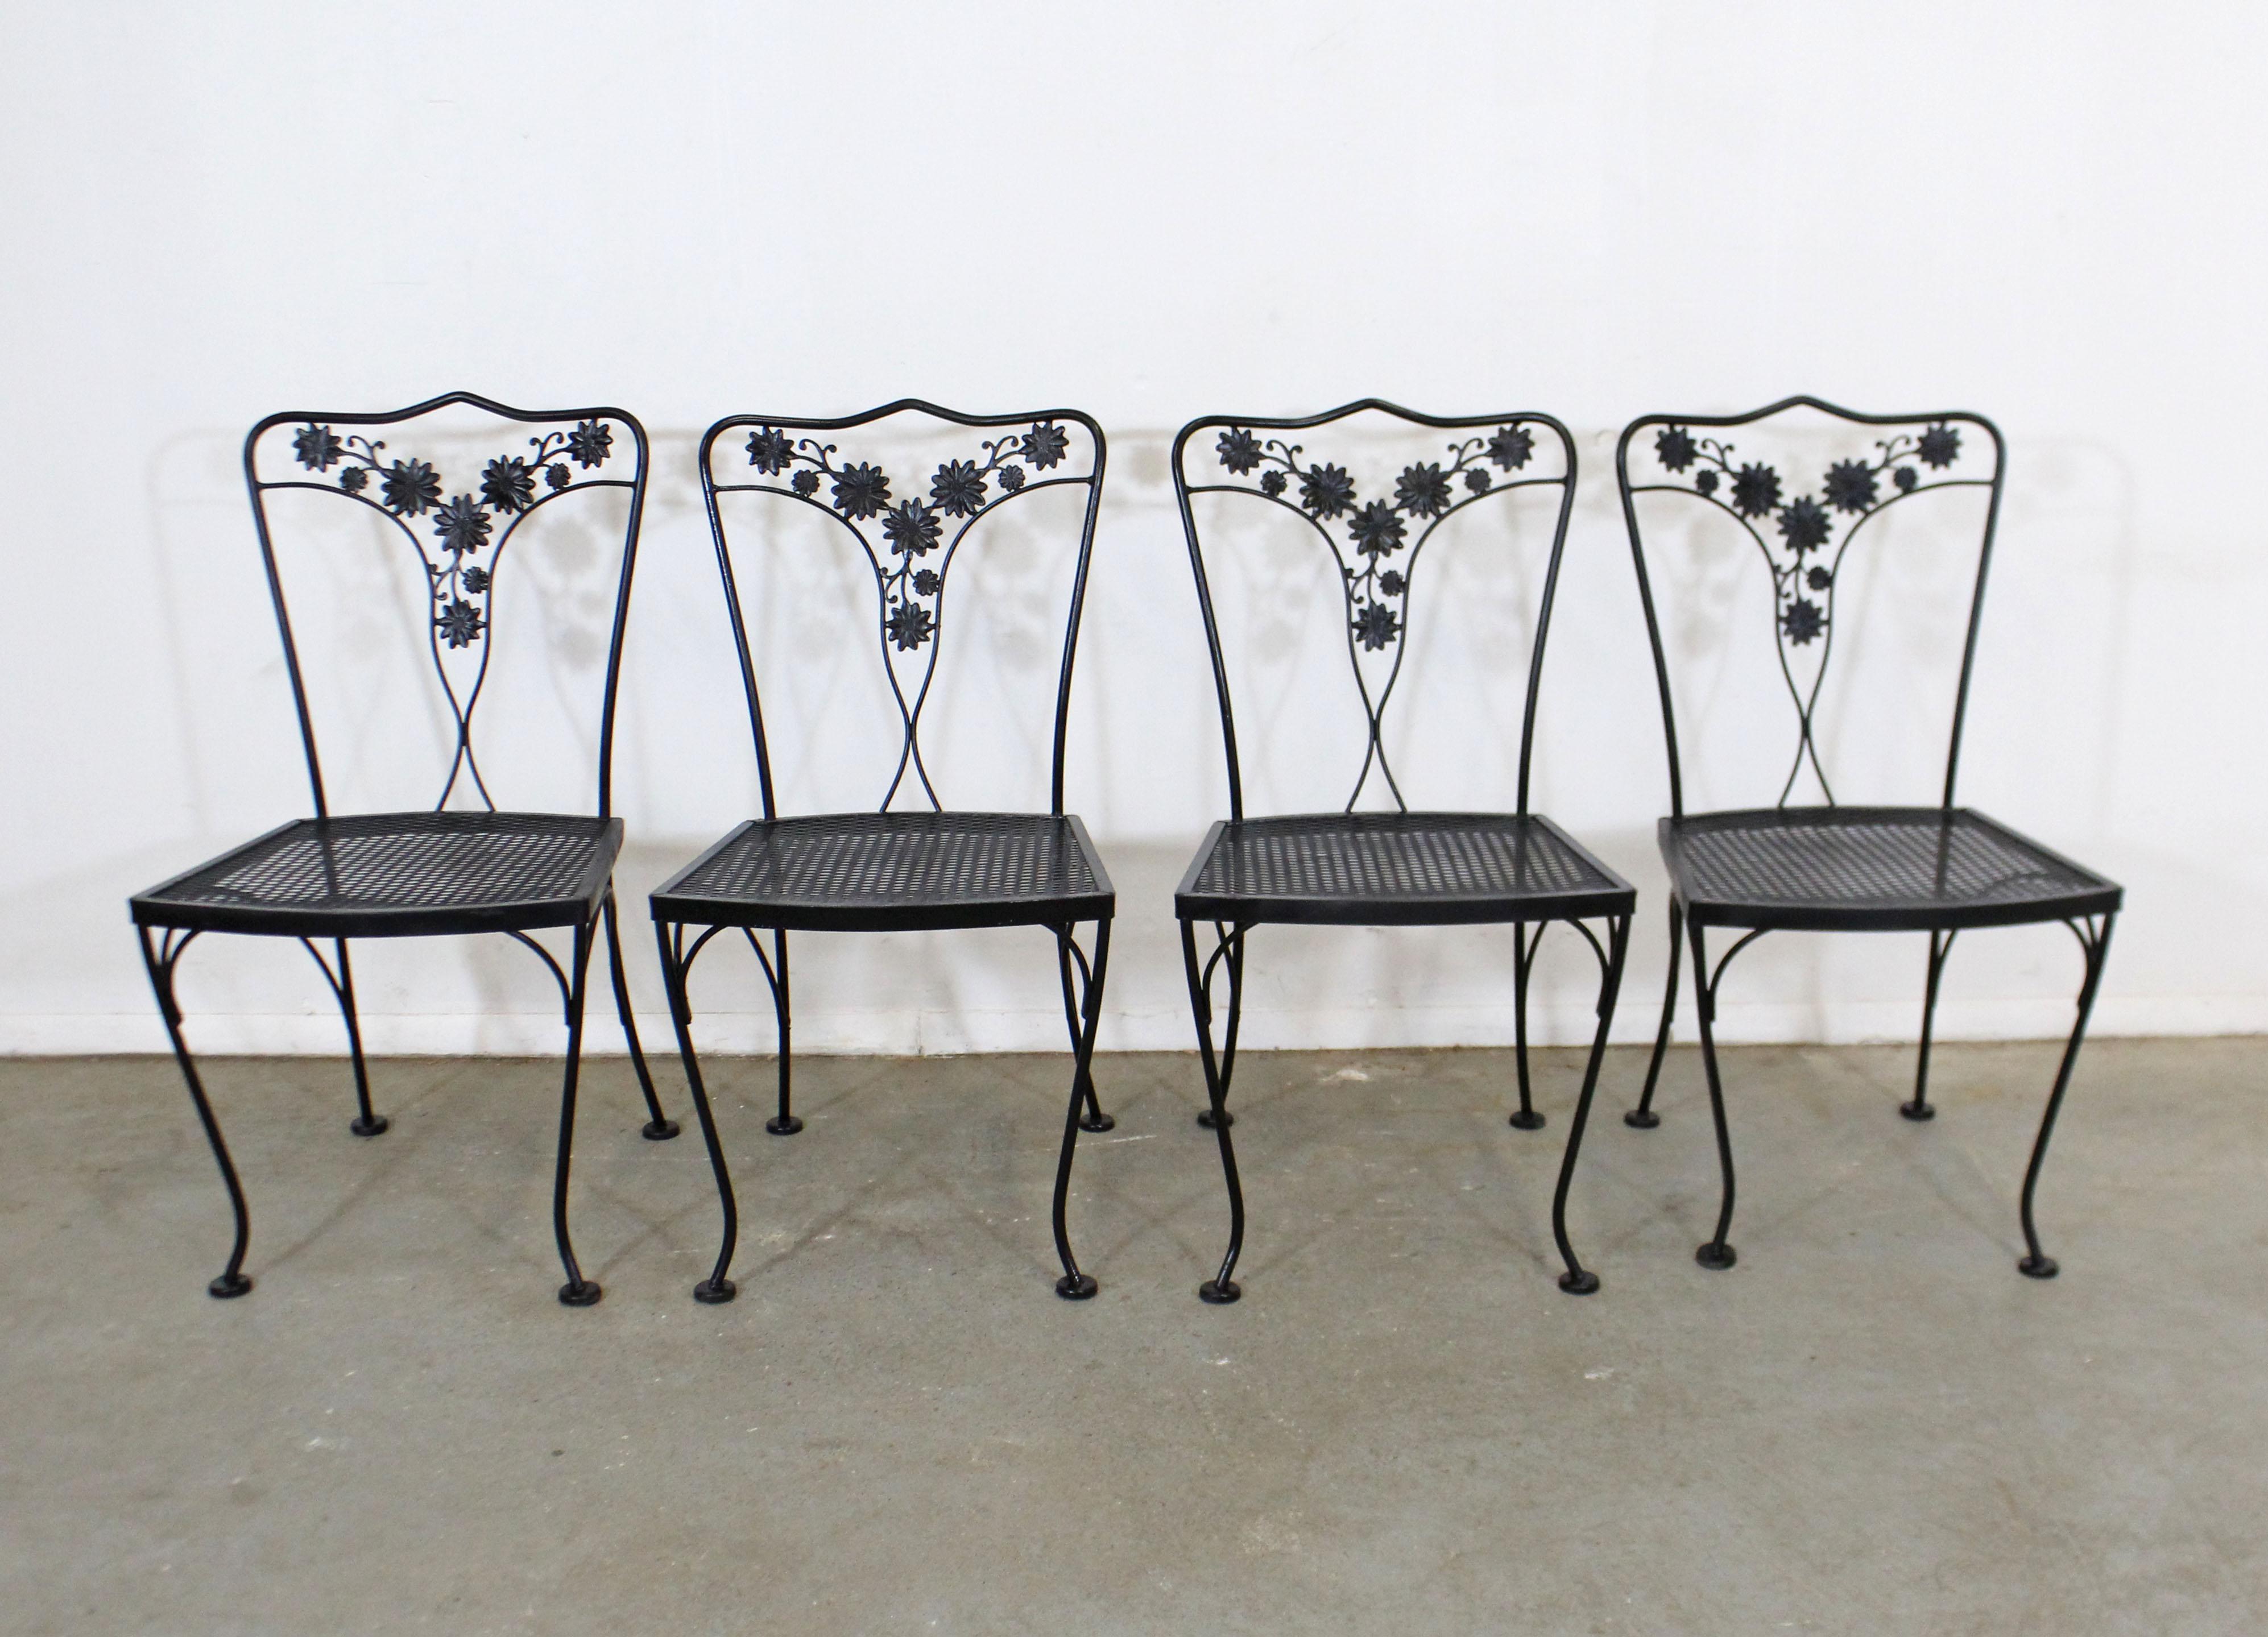 What a find. Offered is a set of 4 vintage wrought iron patio side chairs with floral designs on the backs, curved legs, and mesh seats. Perfect for an outdoor patio space! The chairs are in good condition with some age wear. Two chairs have a